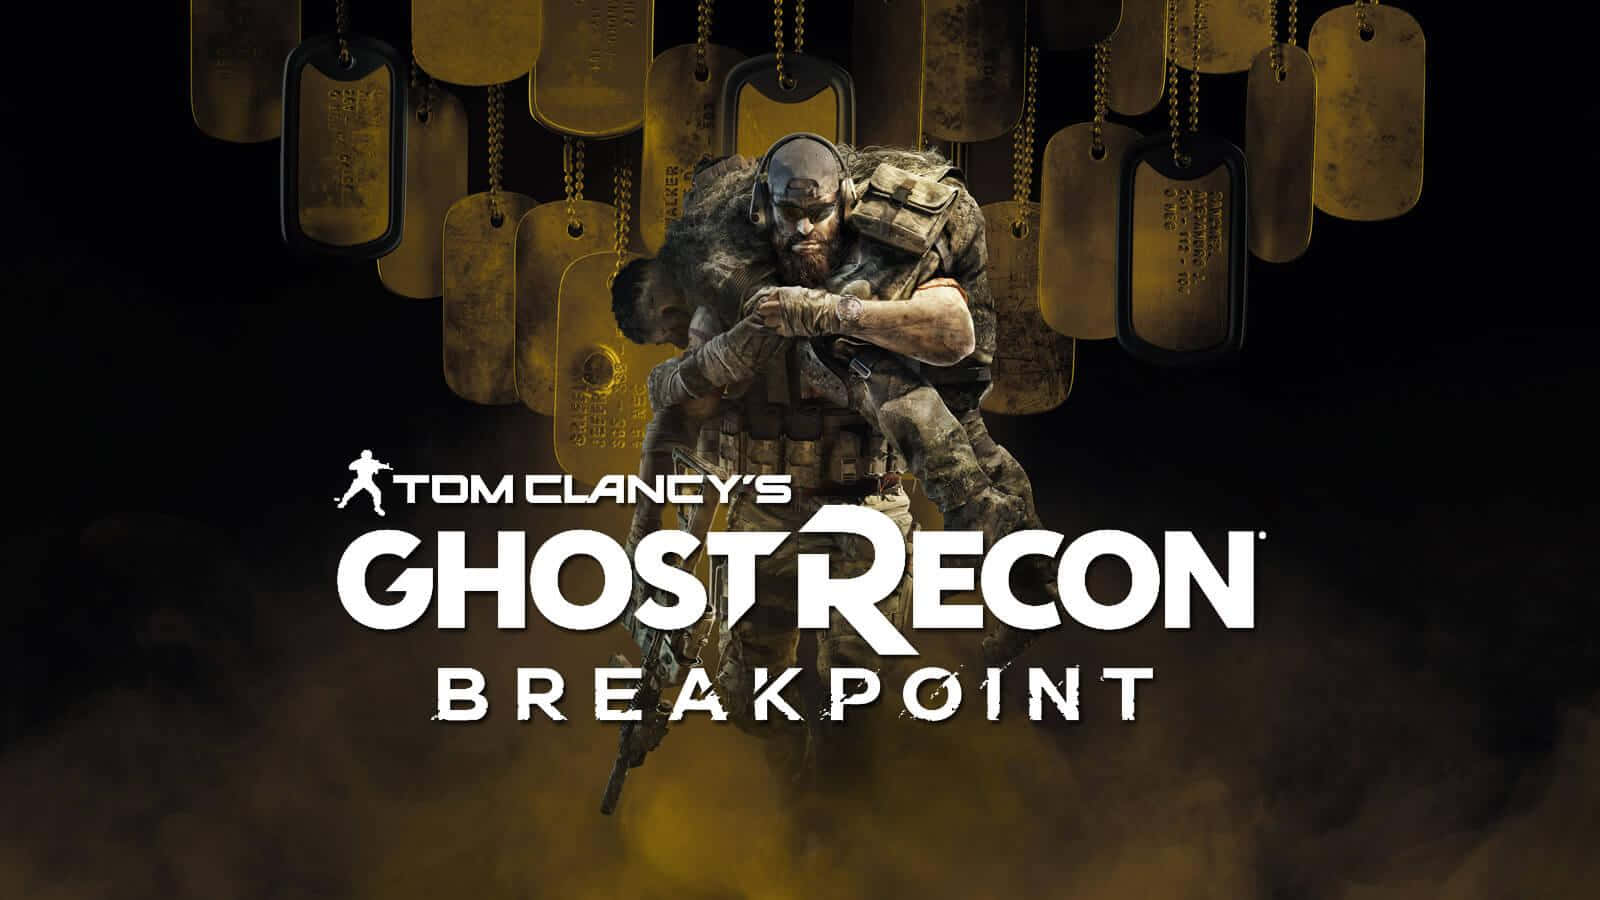 The legendary Ghost Recon team is ready for the mission. Wallpaper